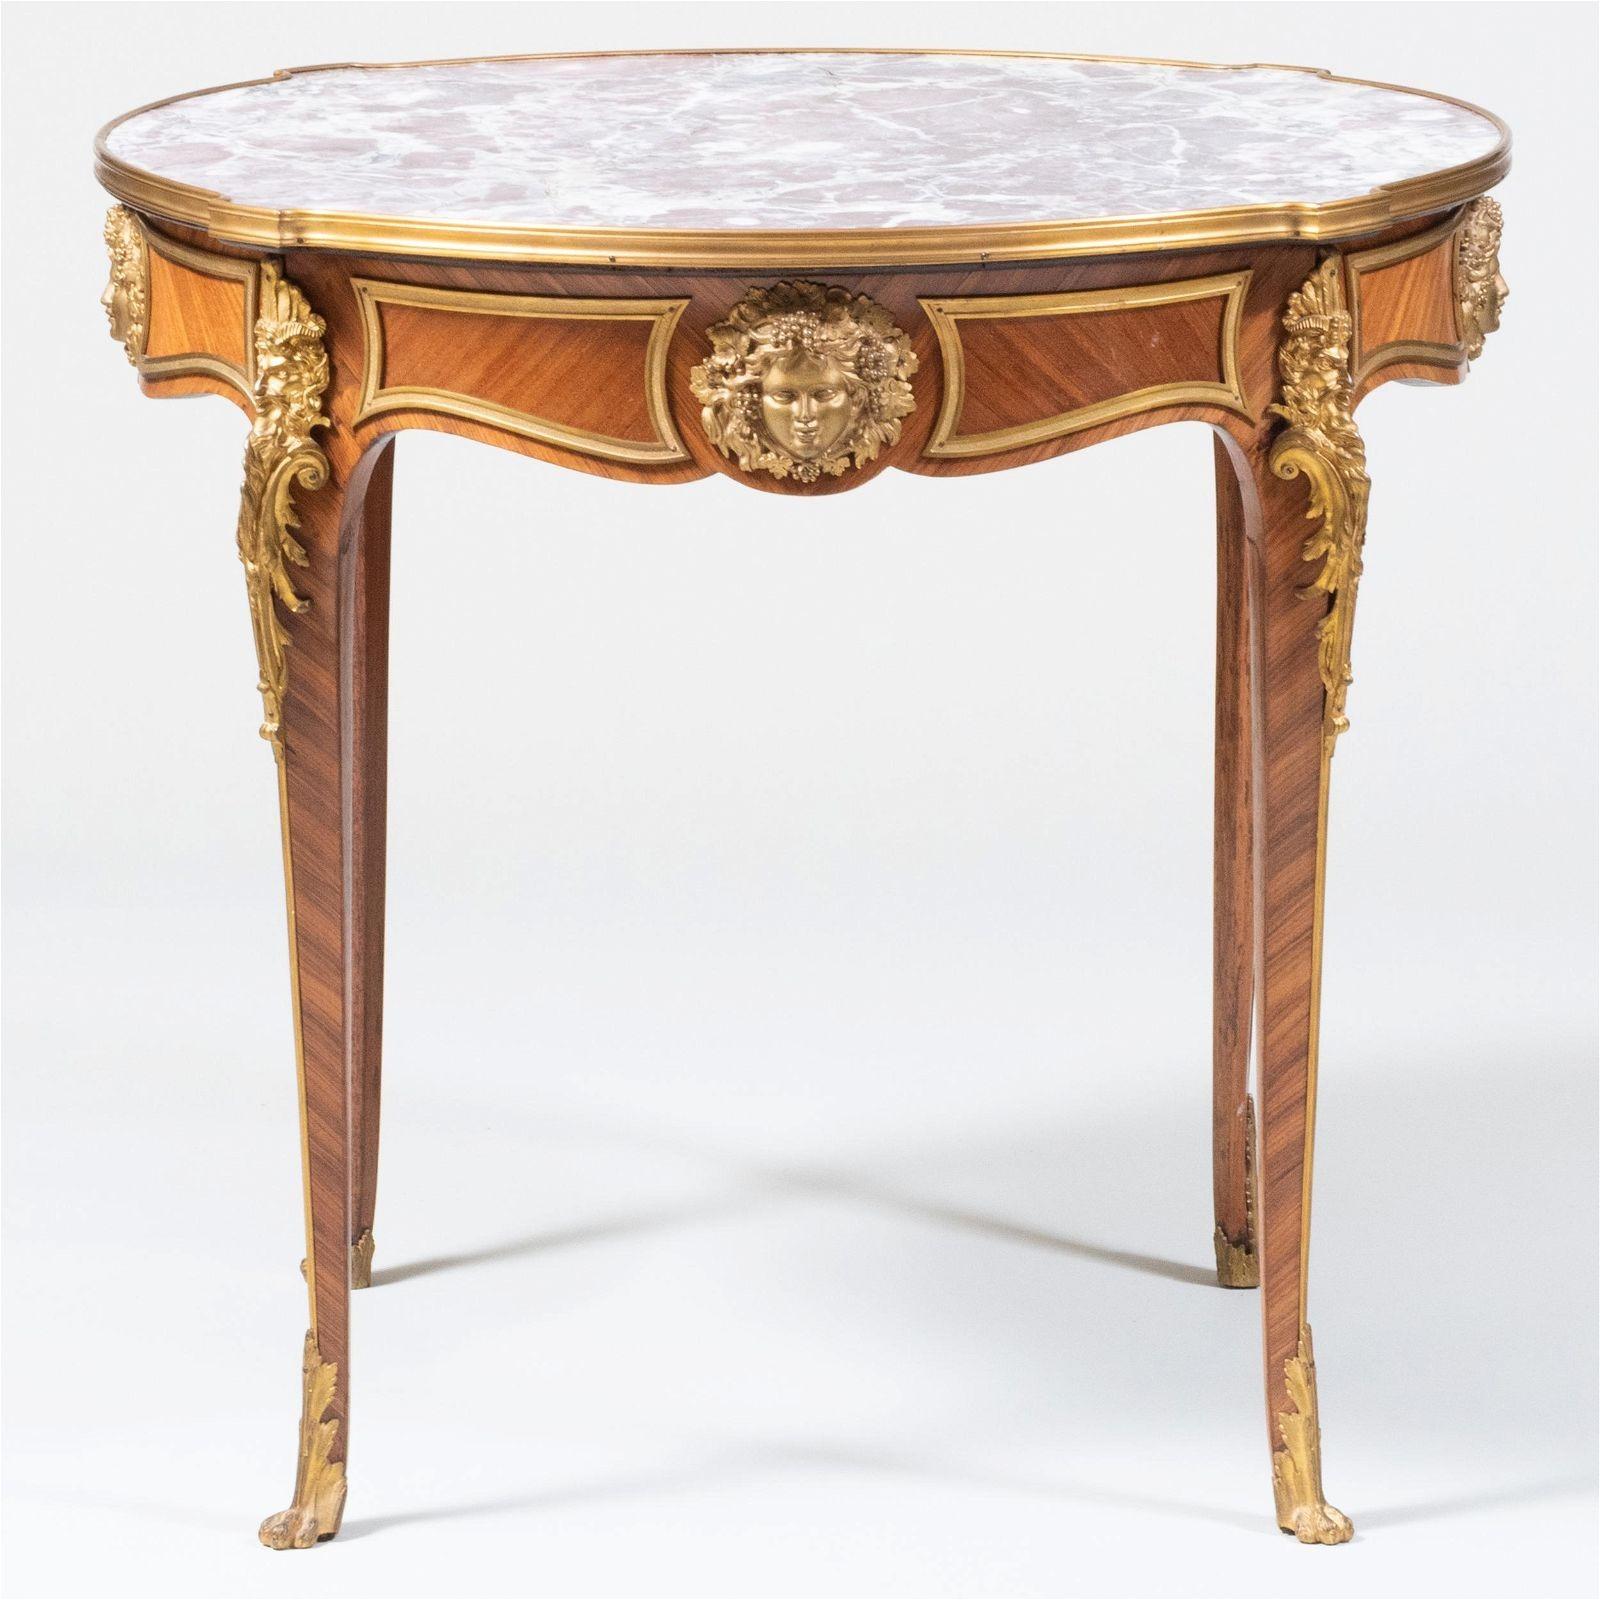 19th Century French Bronze Mounted Marble Top Center Table in Louis XV Style For Sale 2